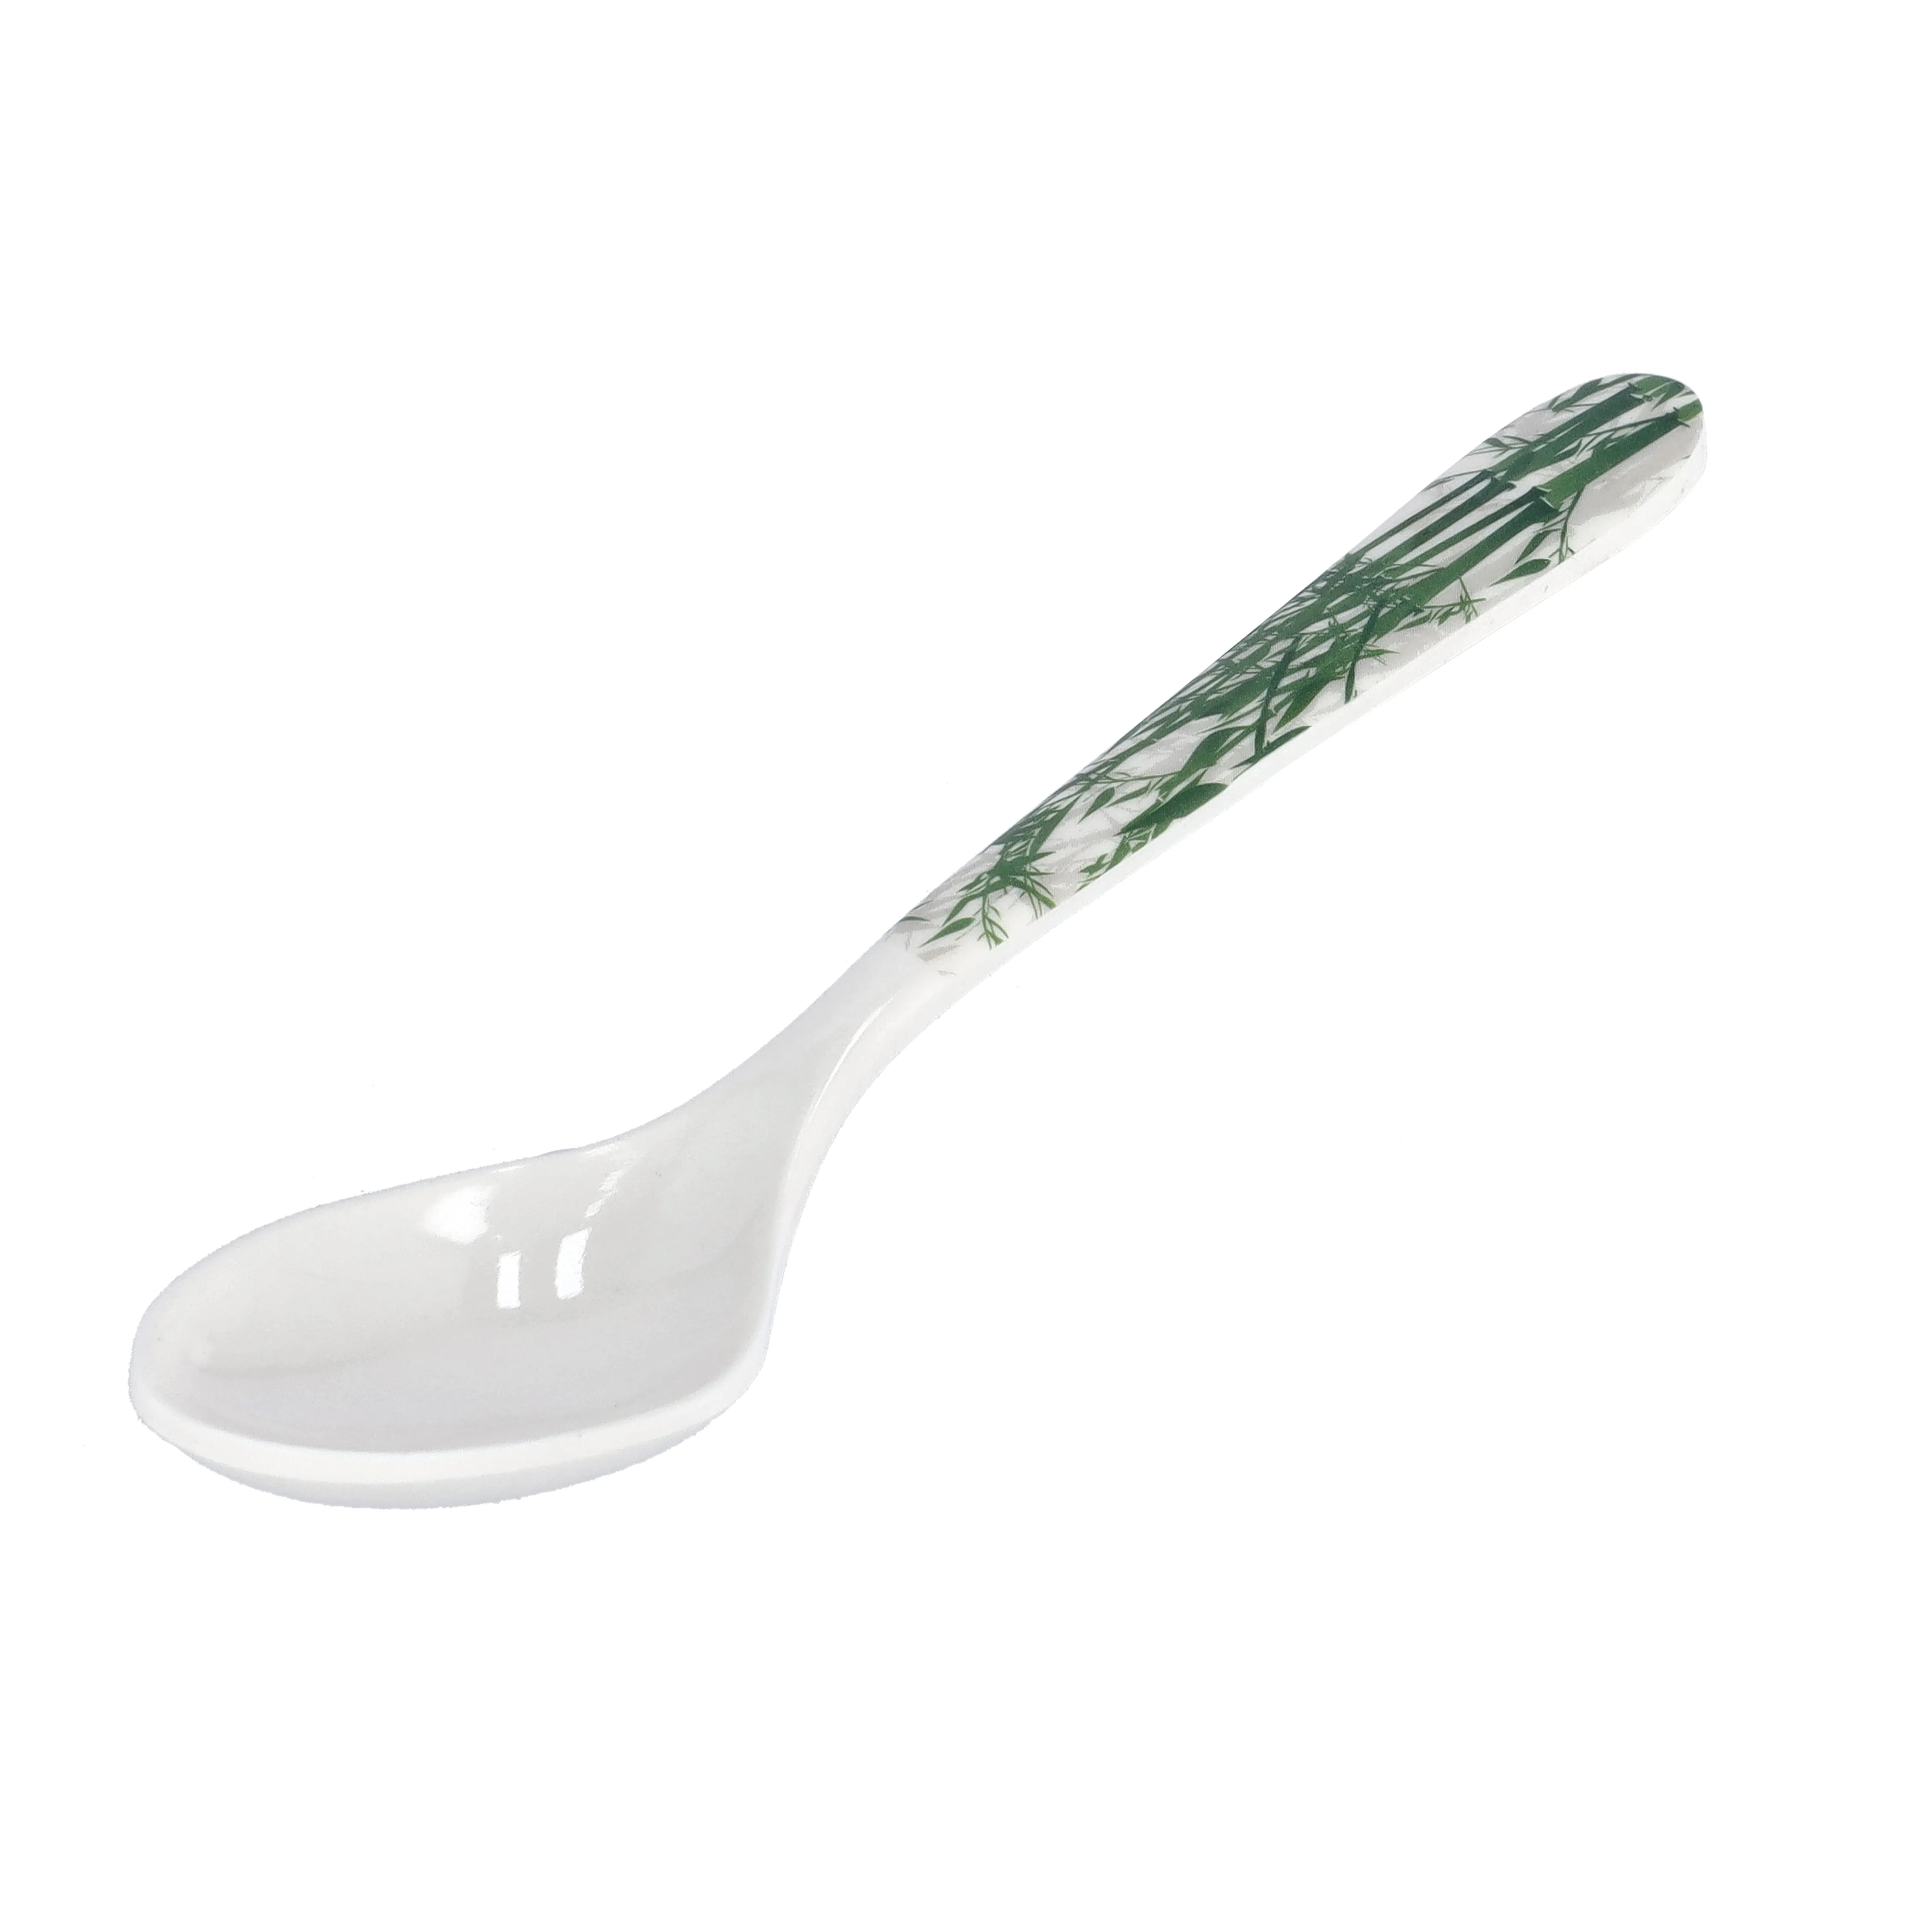 Royalford  Melamine Serving Spoon - Cooking & Serving Spoon with Long Handle, Dinner Cutlery/Crockery Utensil Long Ultra Stylish Design Heat Resistant Spoon Ideal Party Buffet Dinner & More